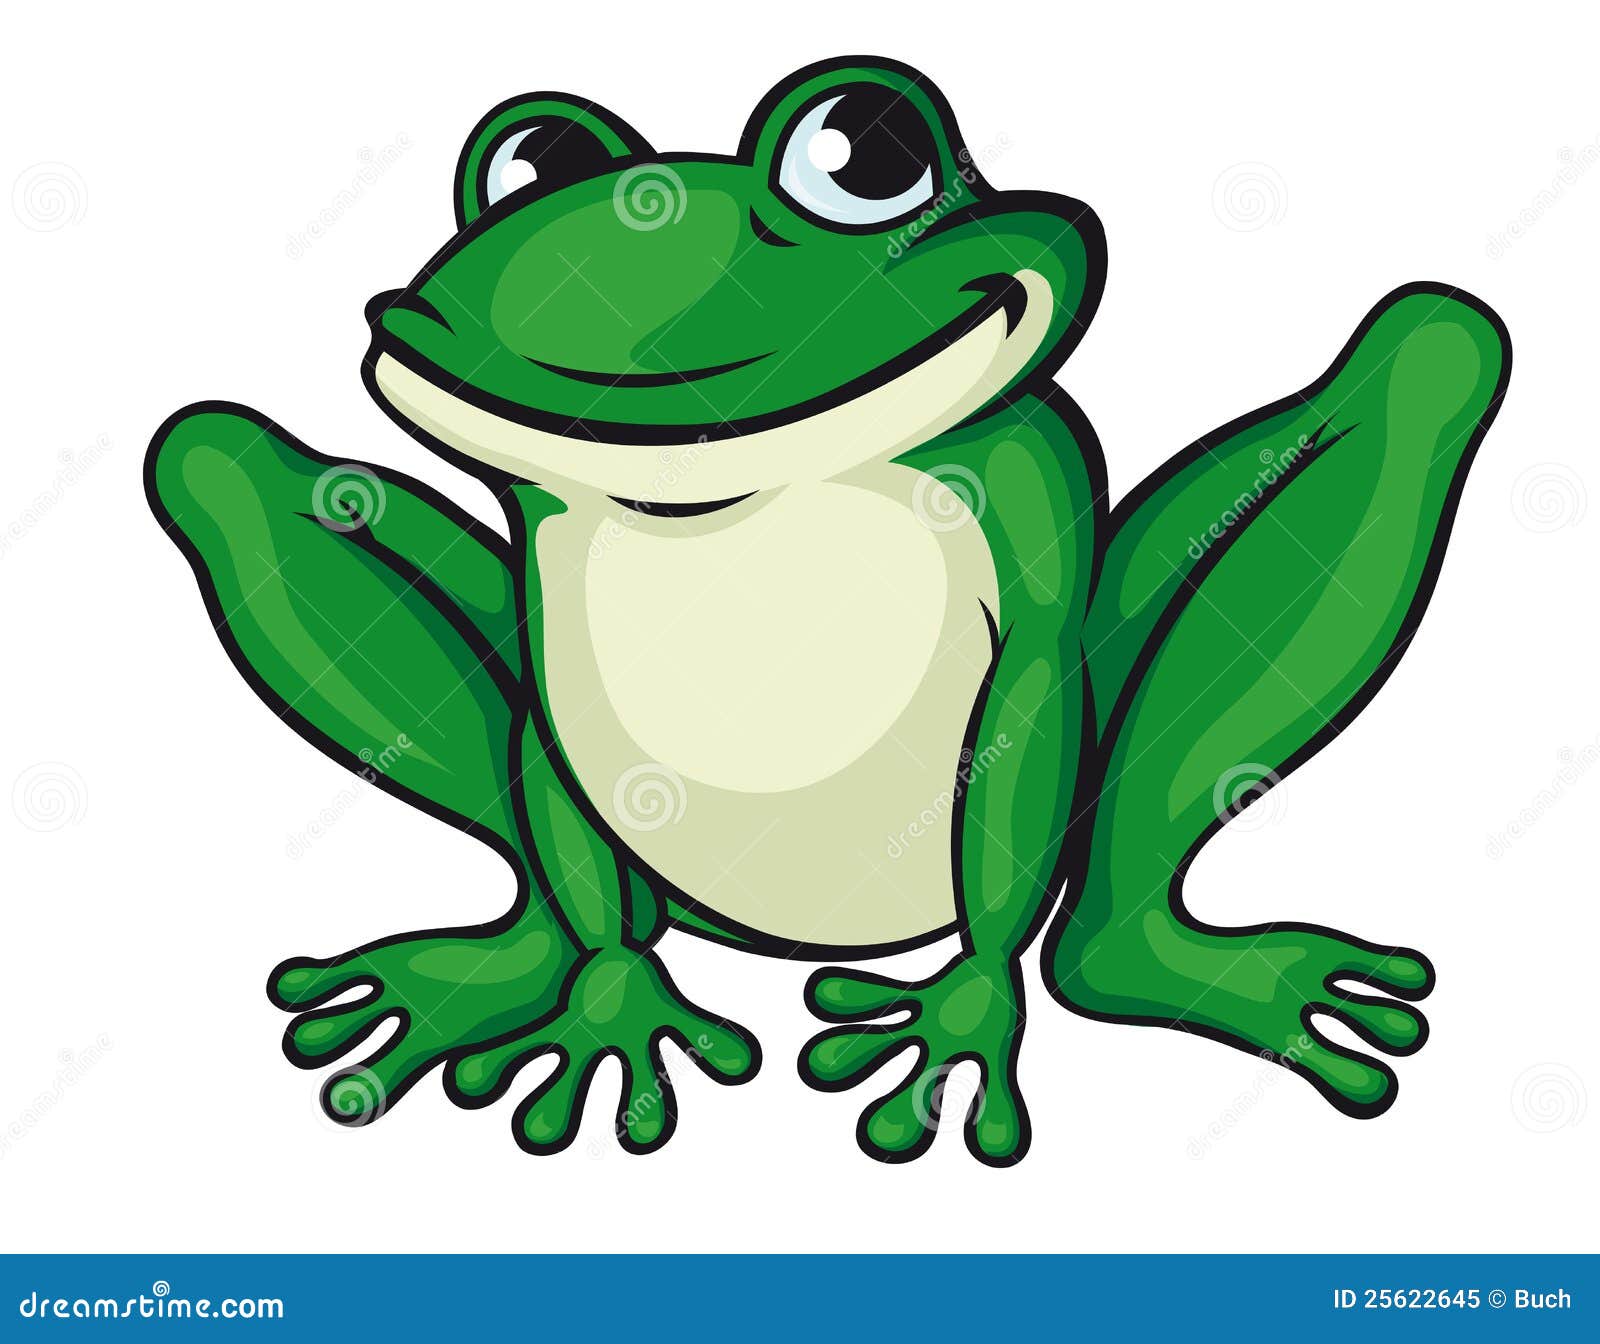 green frog clipart - photo #36